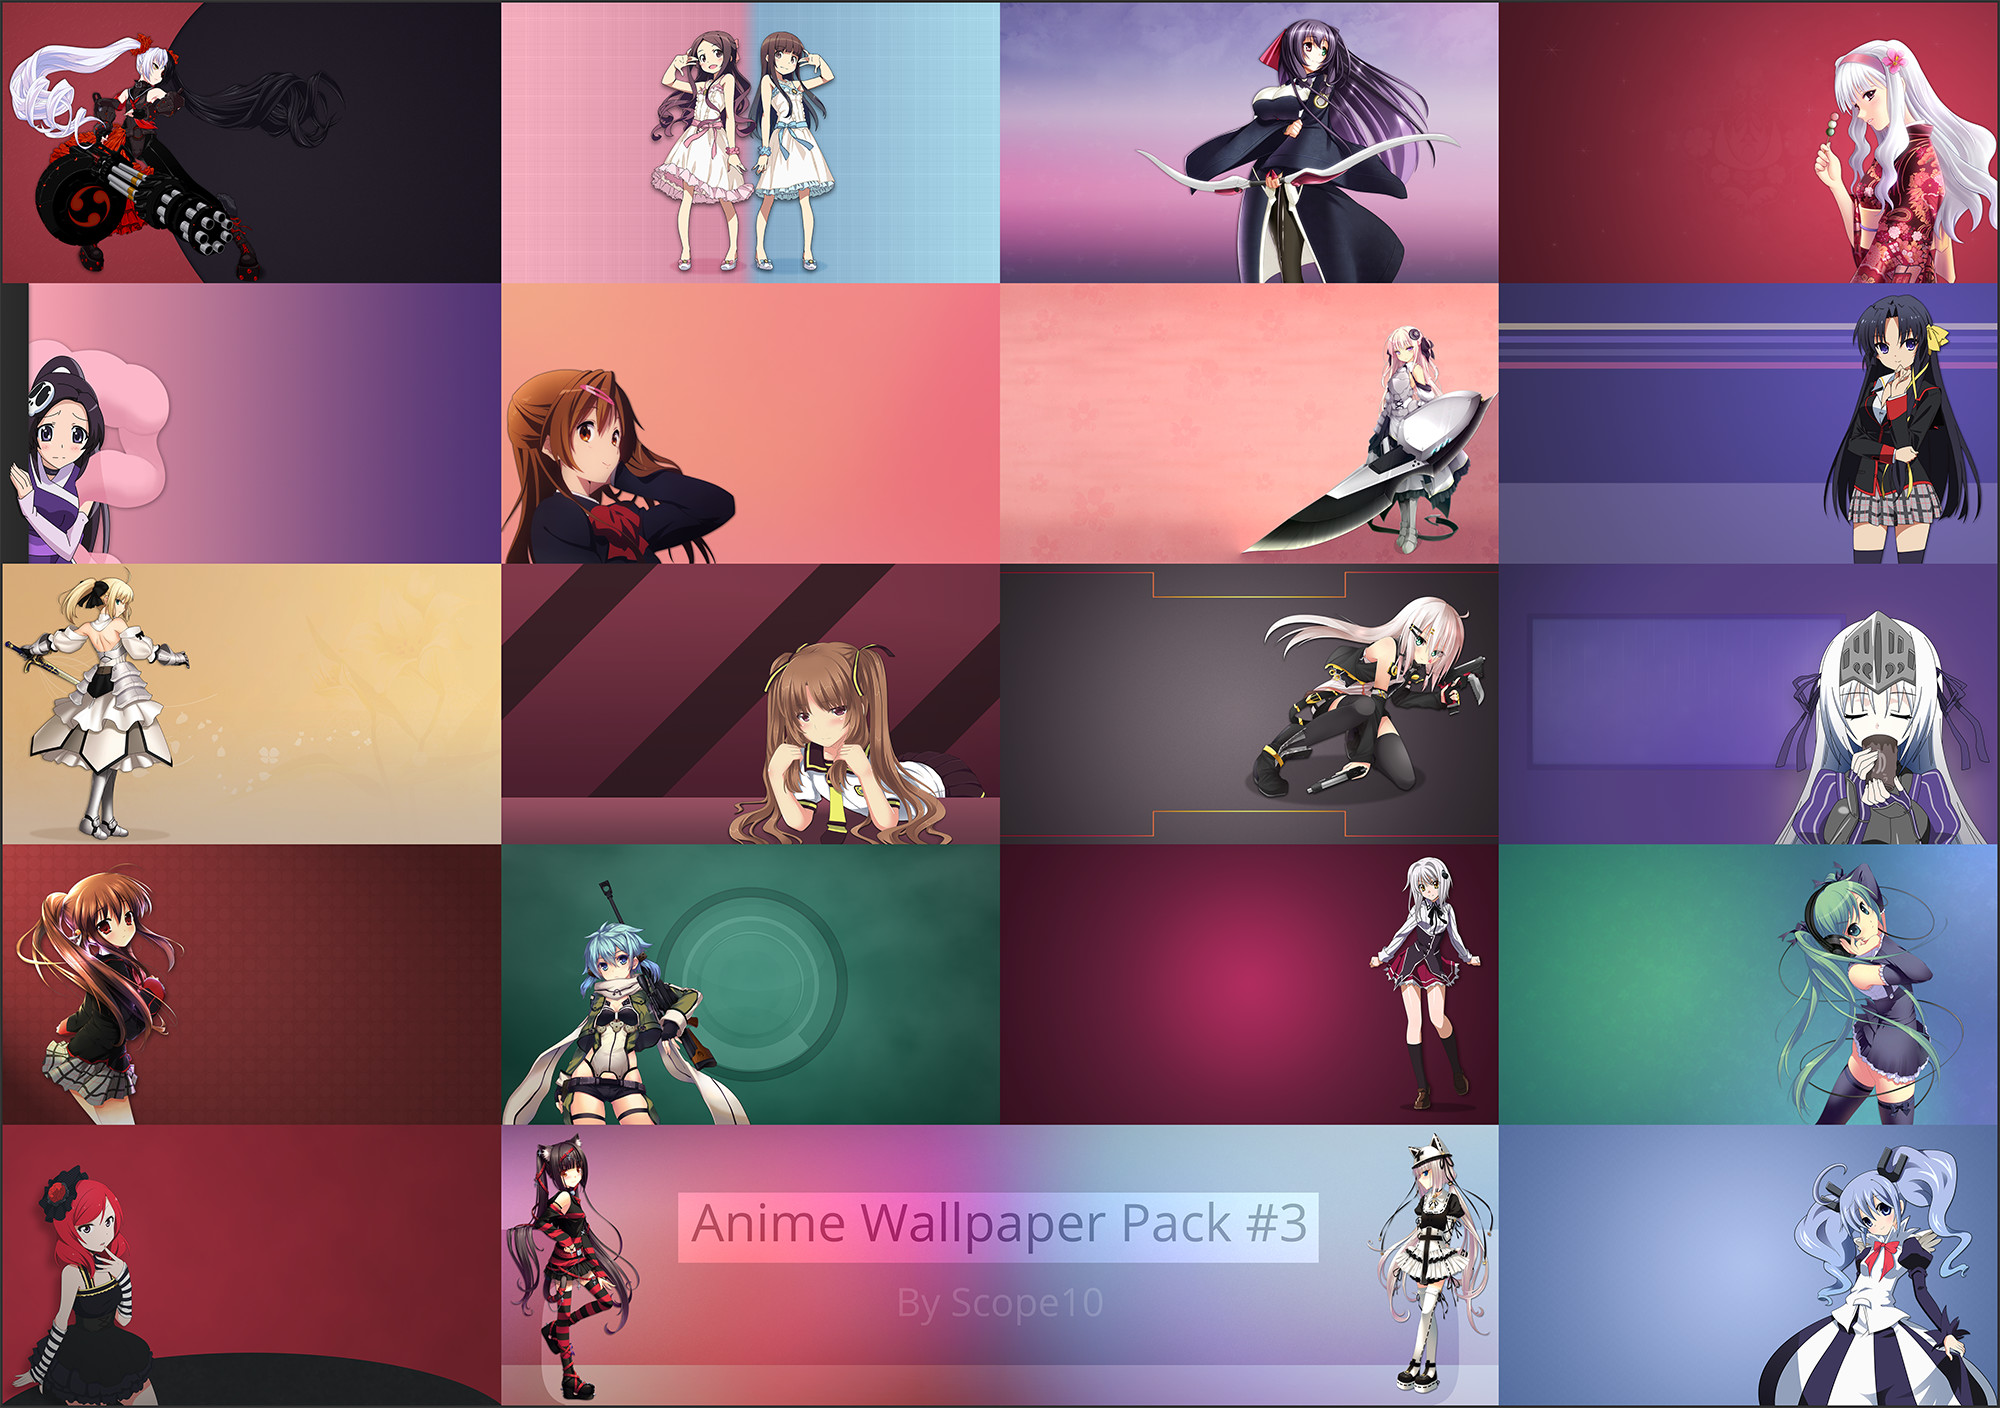 2000x1408 ... Anime Wallpaper Pack #3 by Scope10